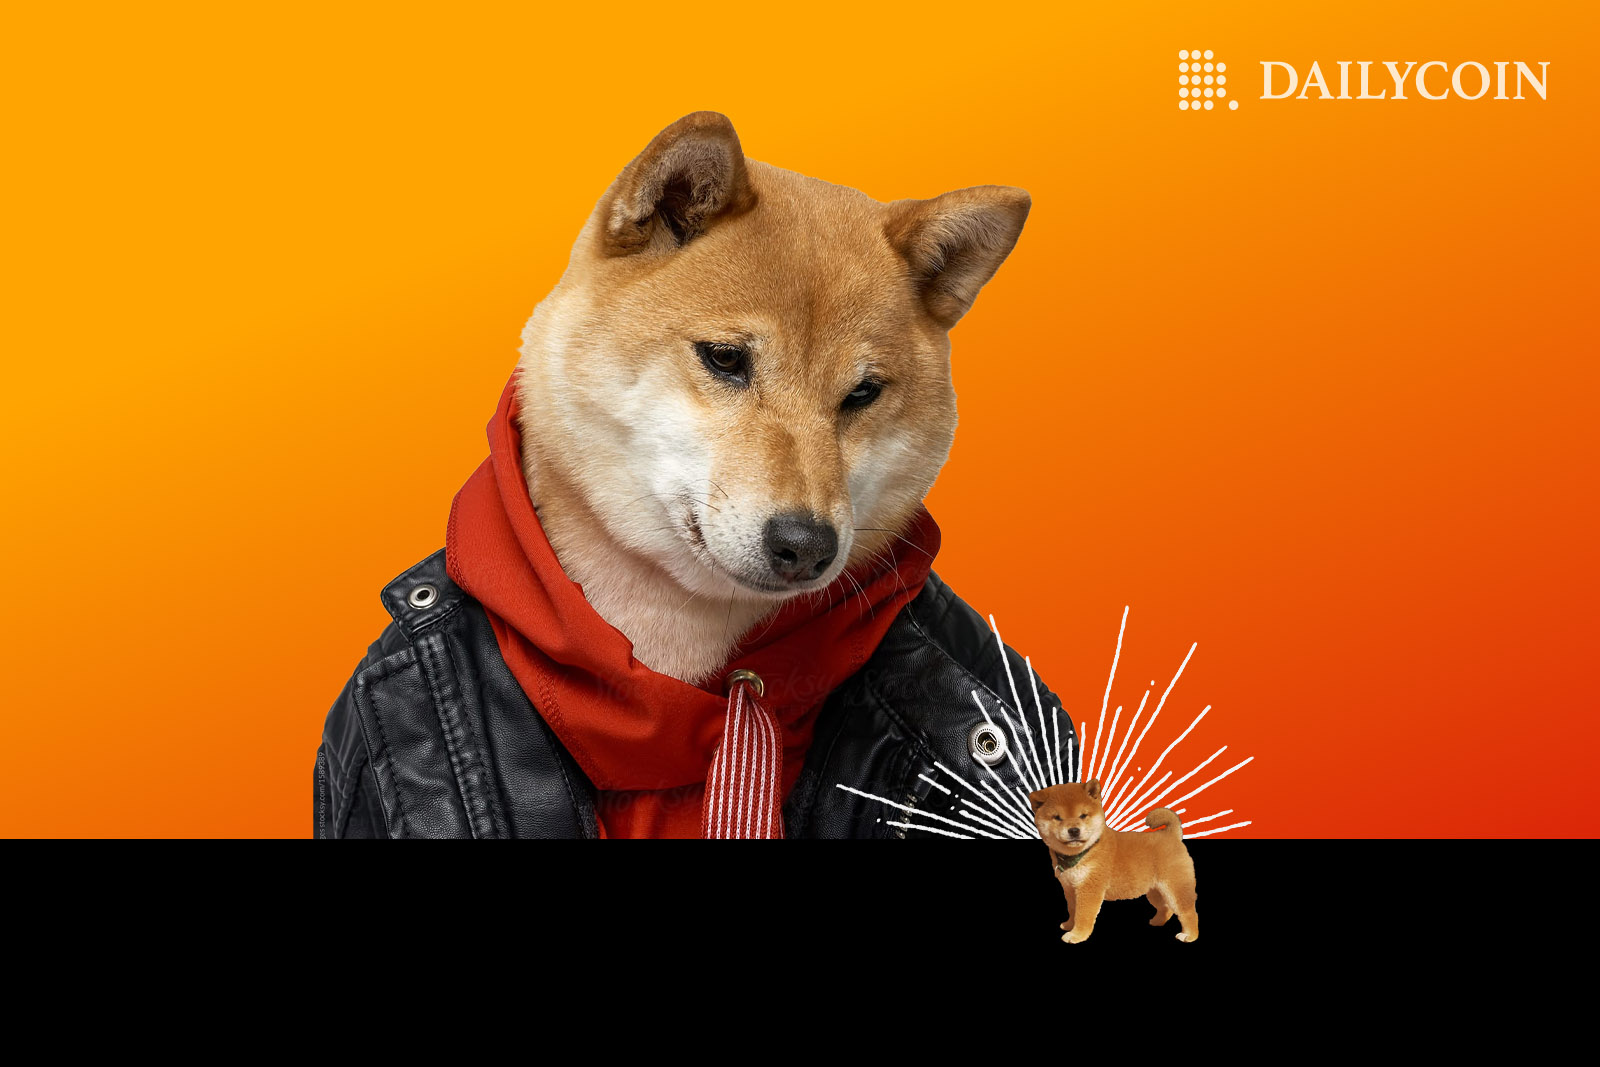 Shiba Inu with leather jacket and red scarf looking at tiny shiba Inu standing on dark border